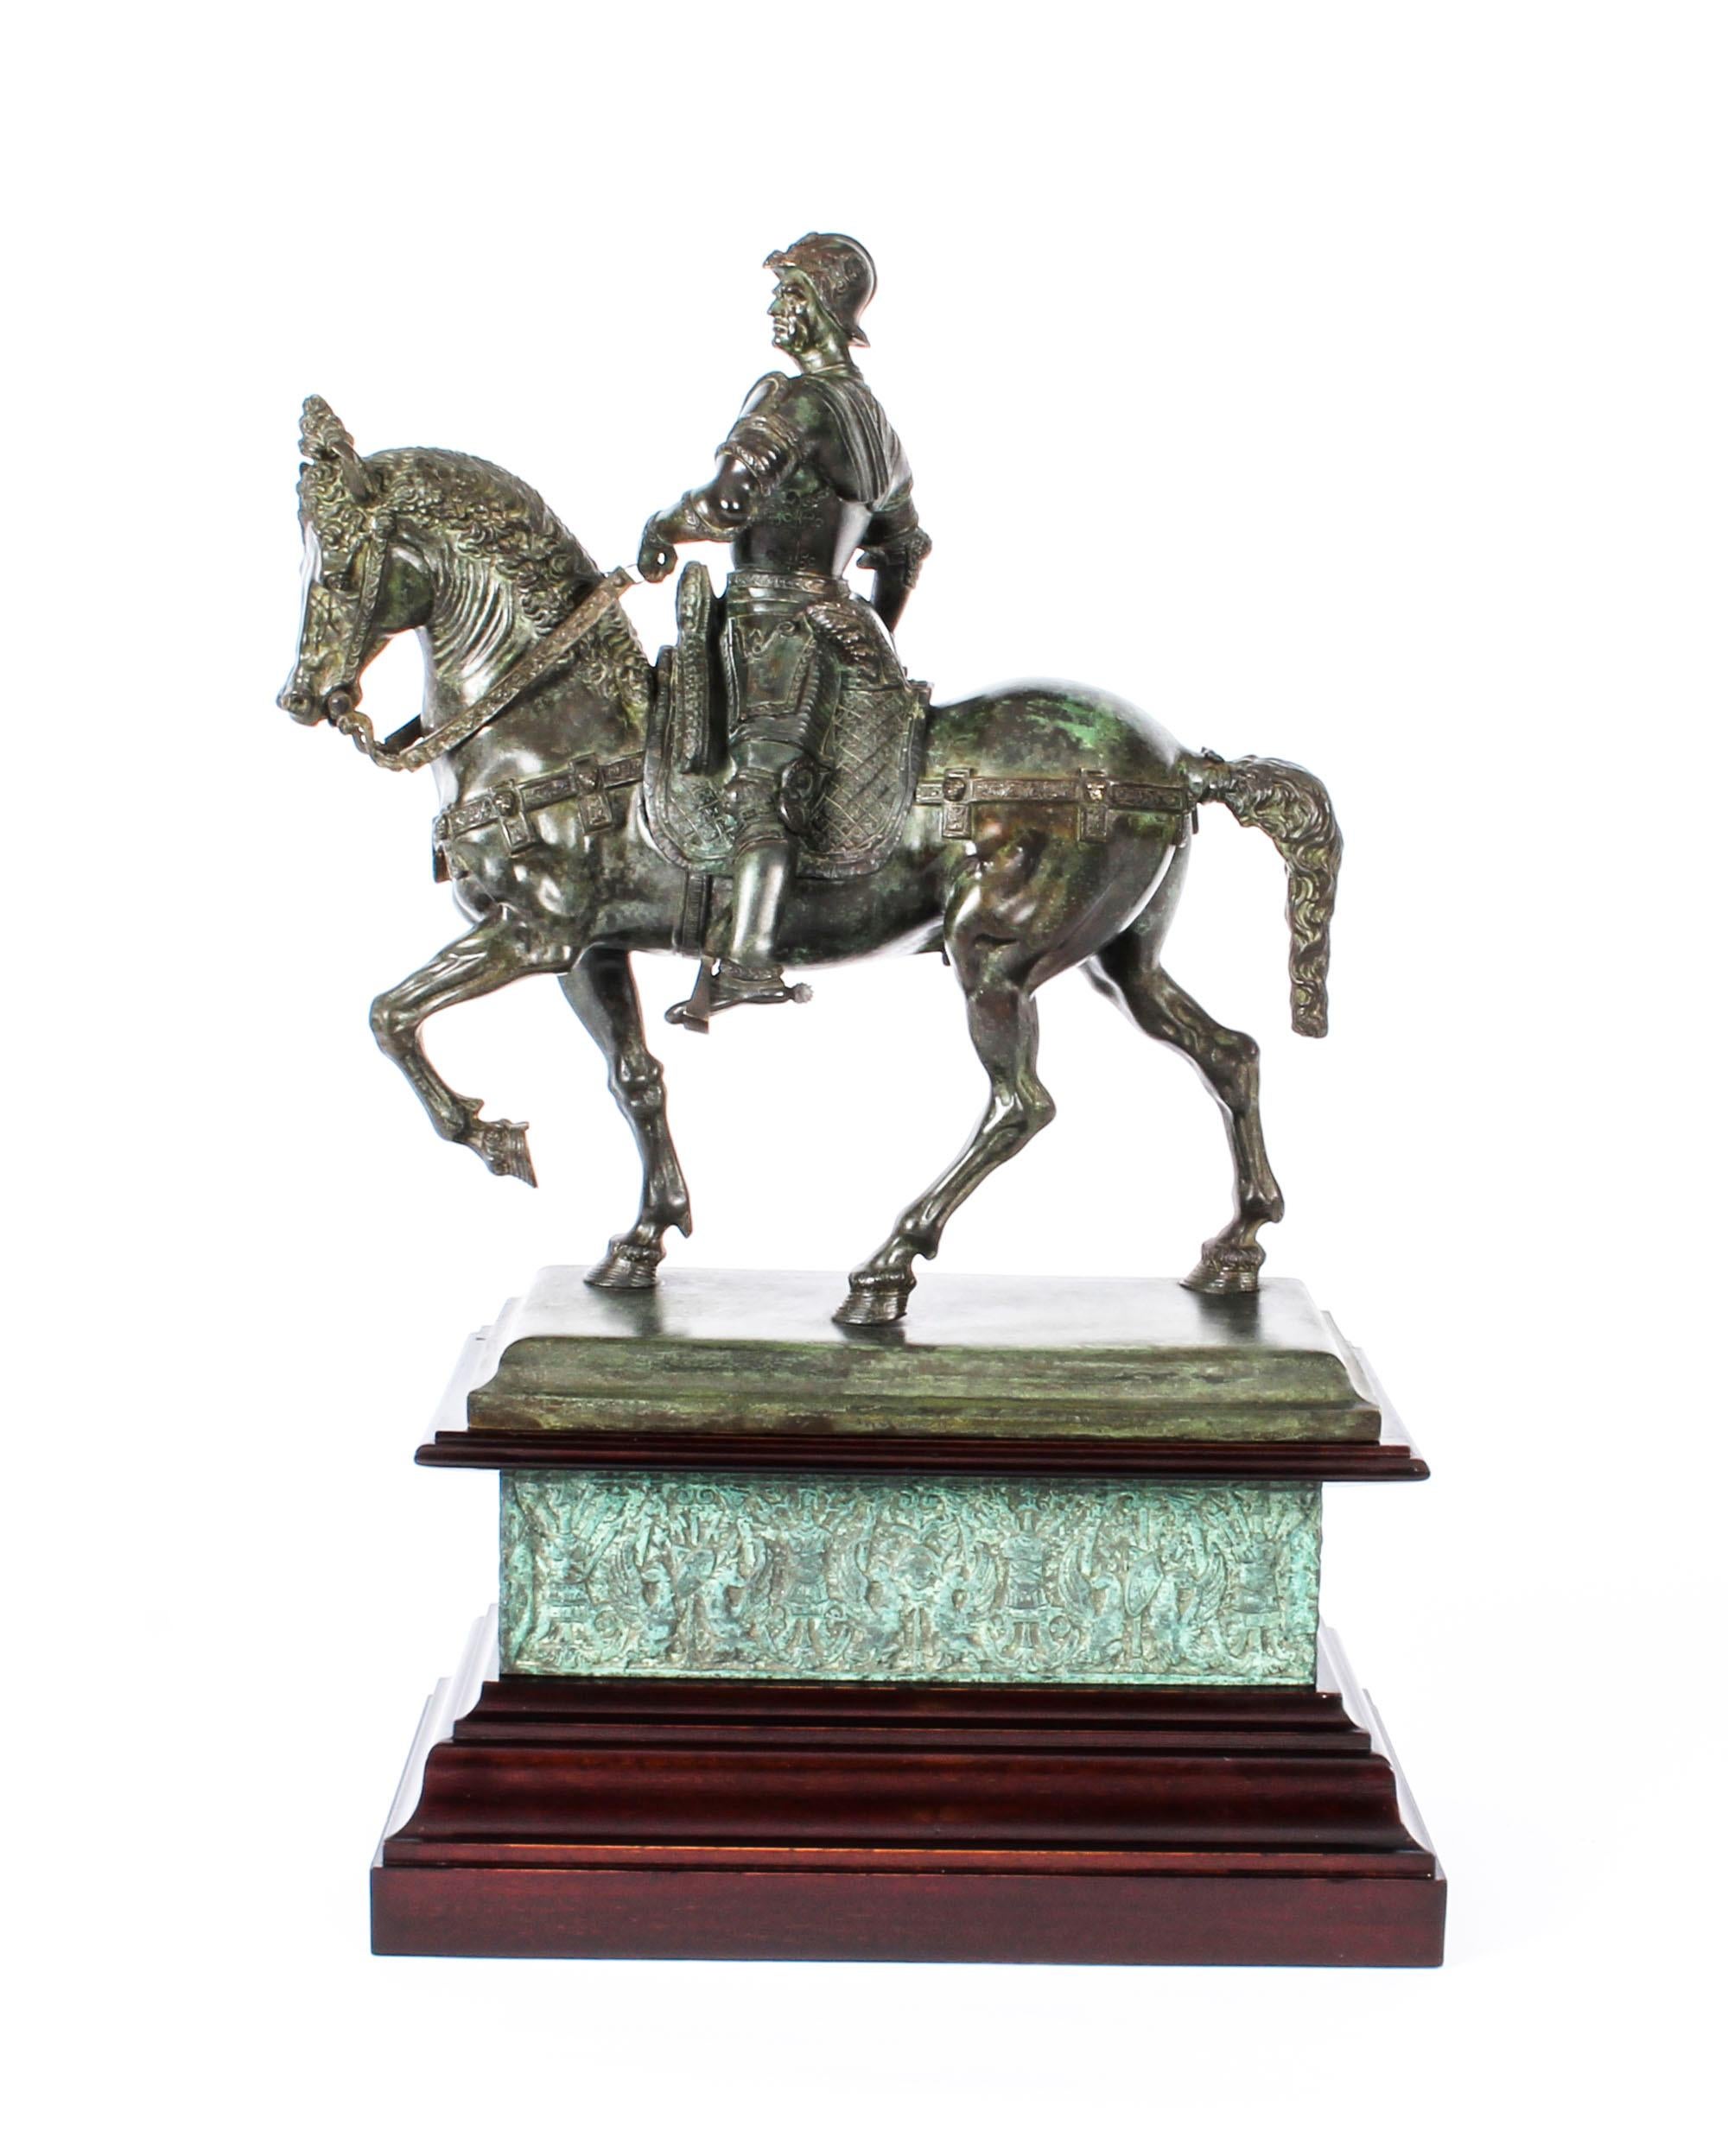 This is a superb antique patinated bronze Equestrian Statue of Bartolomeo Colleoni, circa 1860 in date.
 
This stunning patinated bronze statue is after the original Renaissance sculpture which was executed by Andrea del Verrocchio in 1480–1488, in